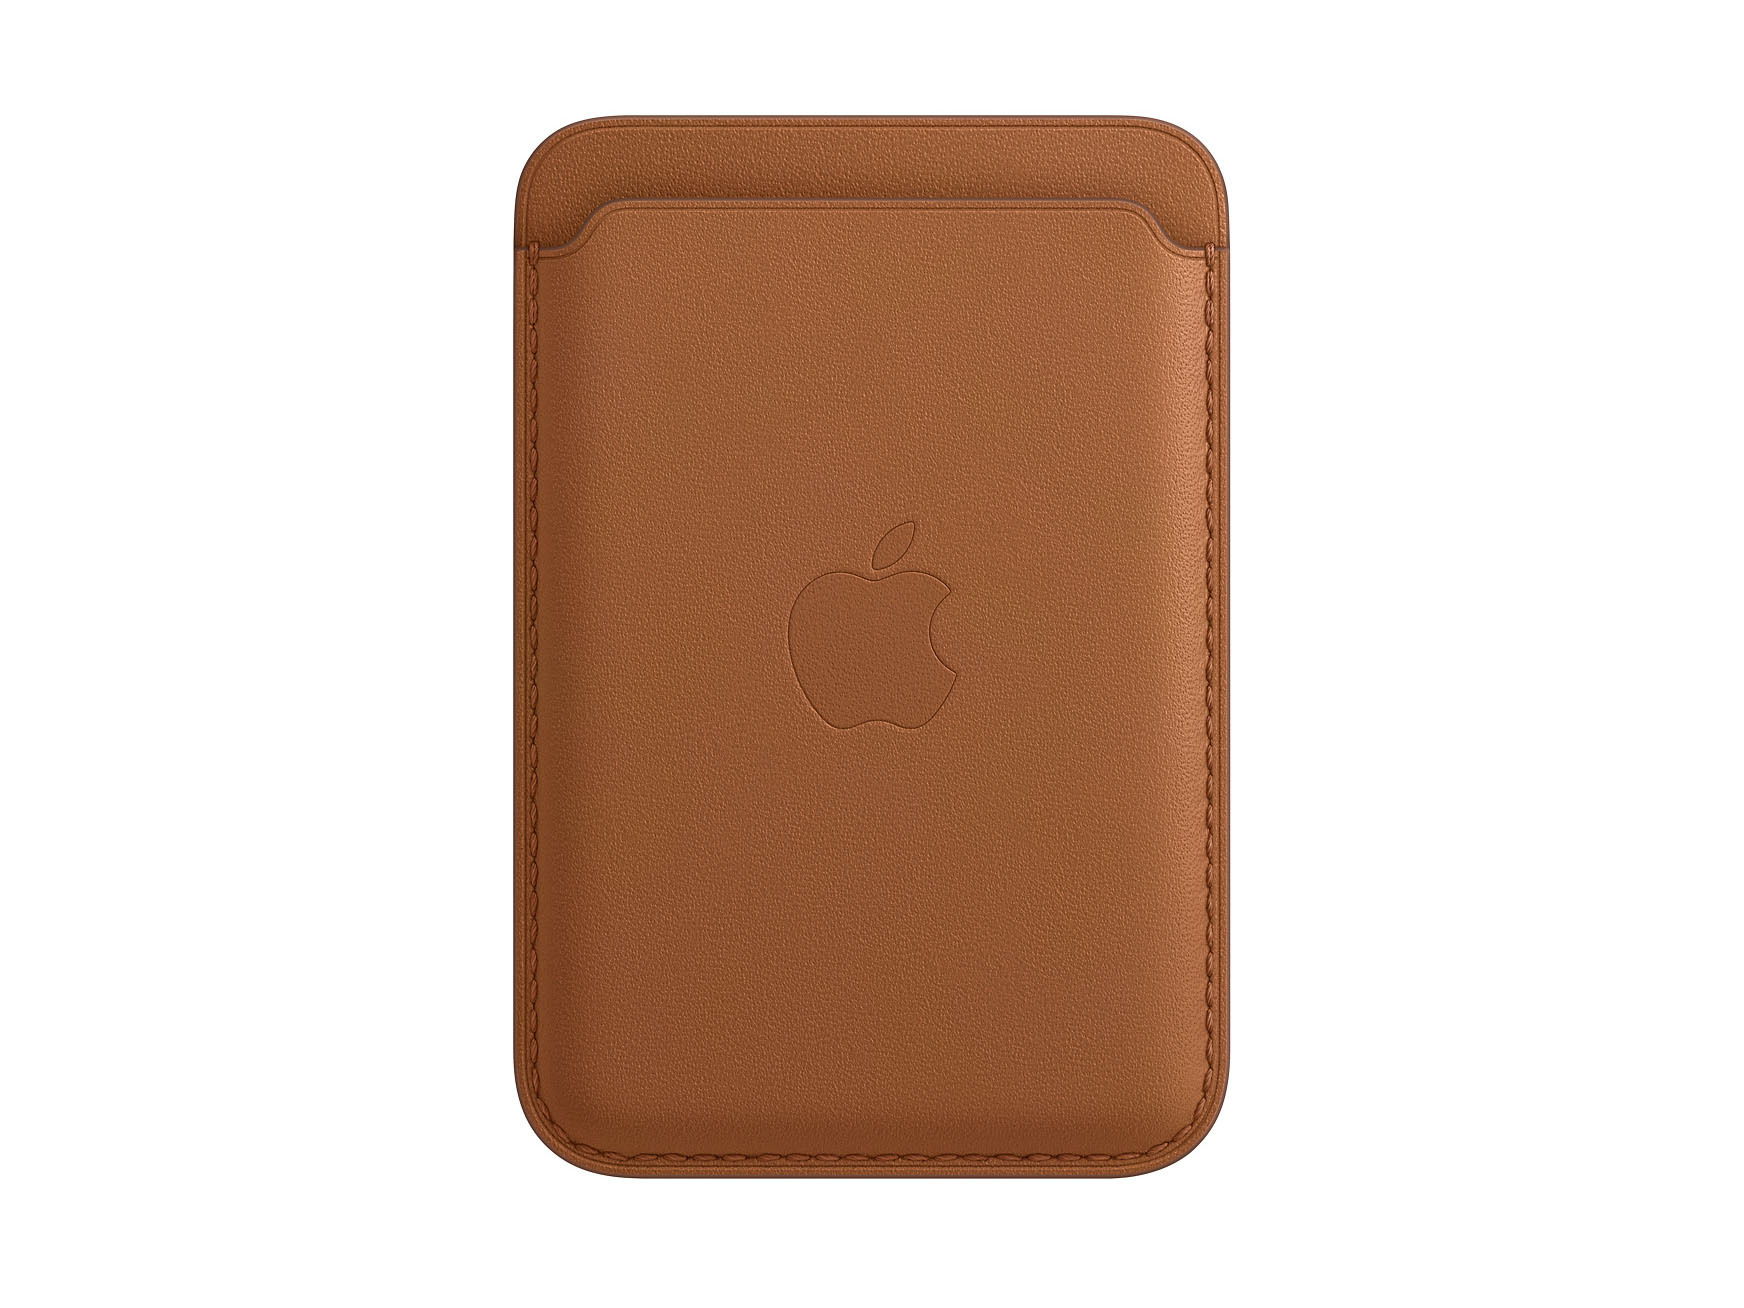 APPLE iPHONE LEATHER WALLET WITH MAGSAFE (£59)